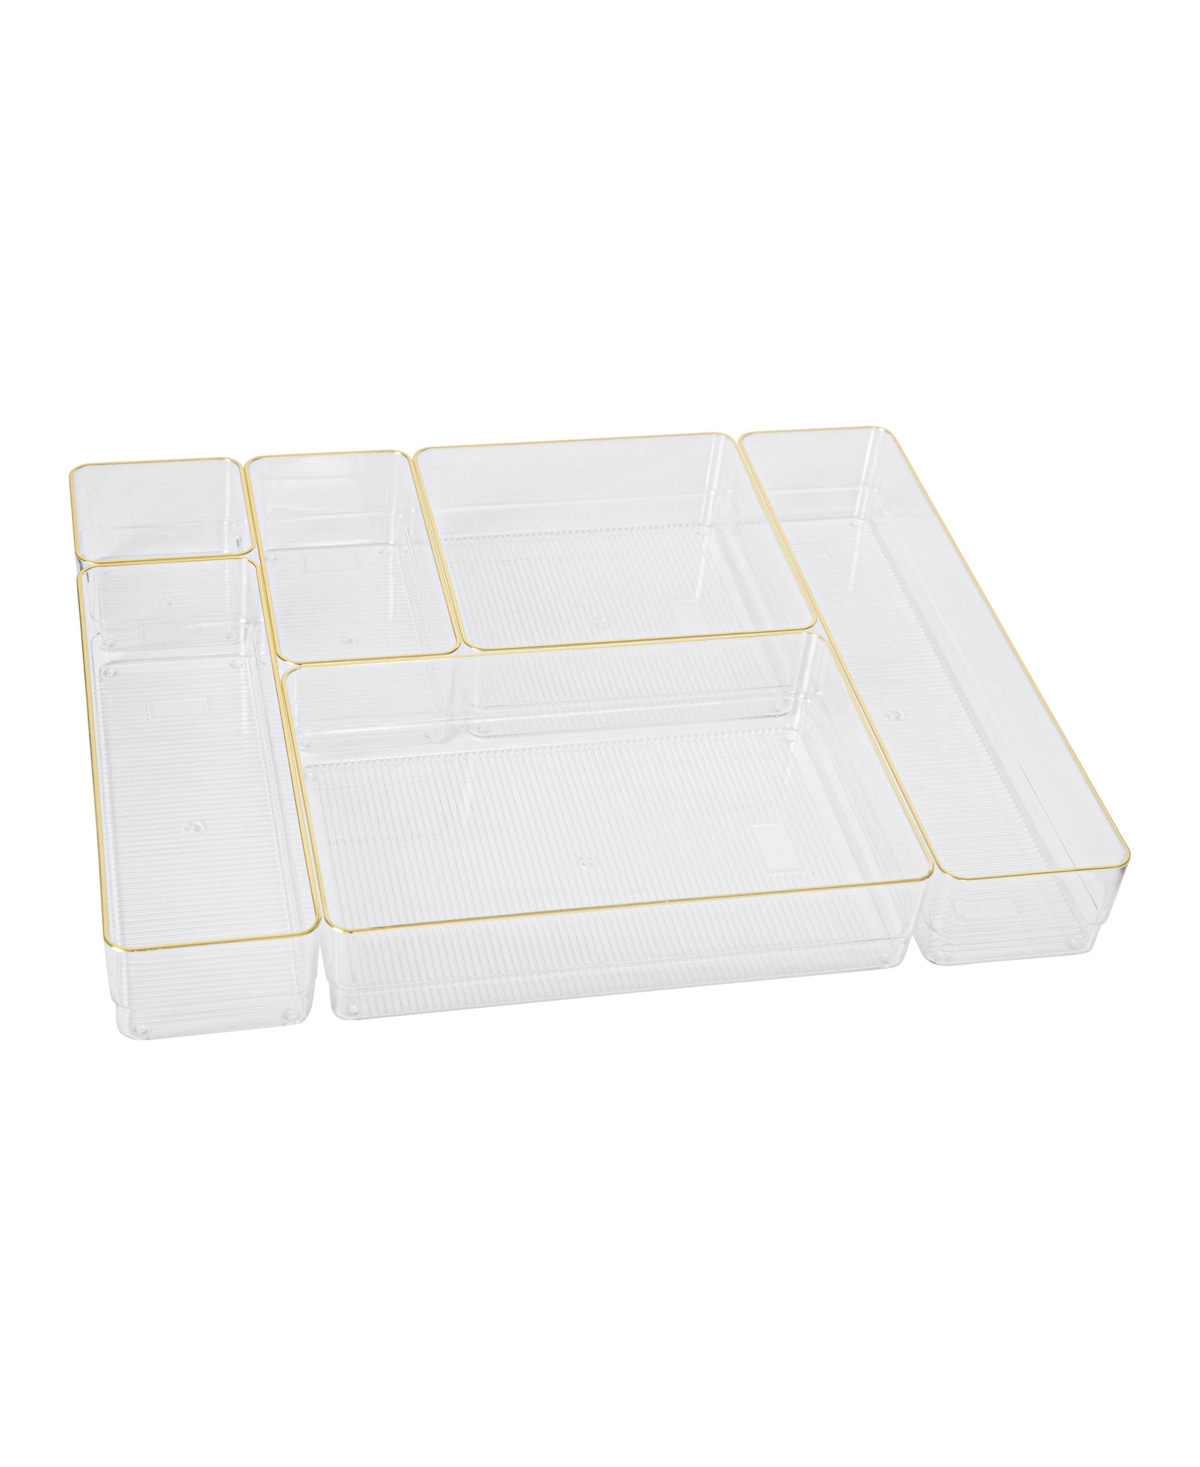 Kerry Plastic Stackable Office Desk Drawer Organizers, 6 Compartments - Clear, Gold Trim